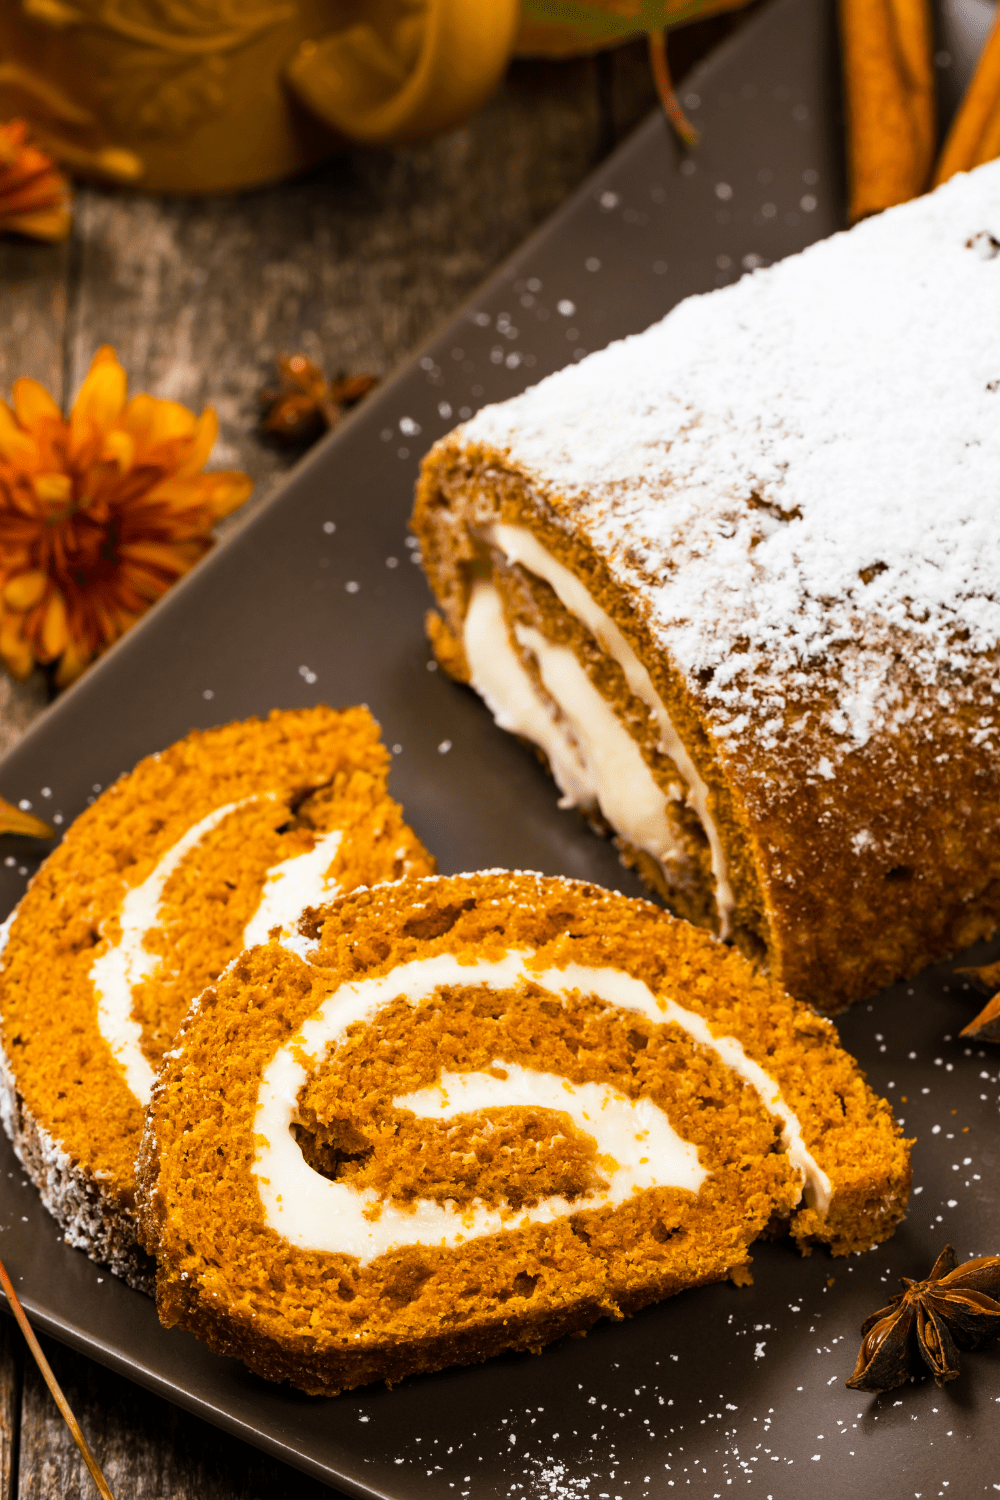 Pumpkin roll with cream filling sprinkled with powdered sugar.